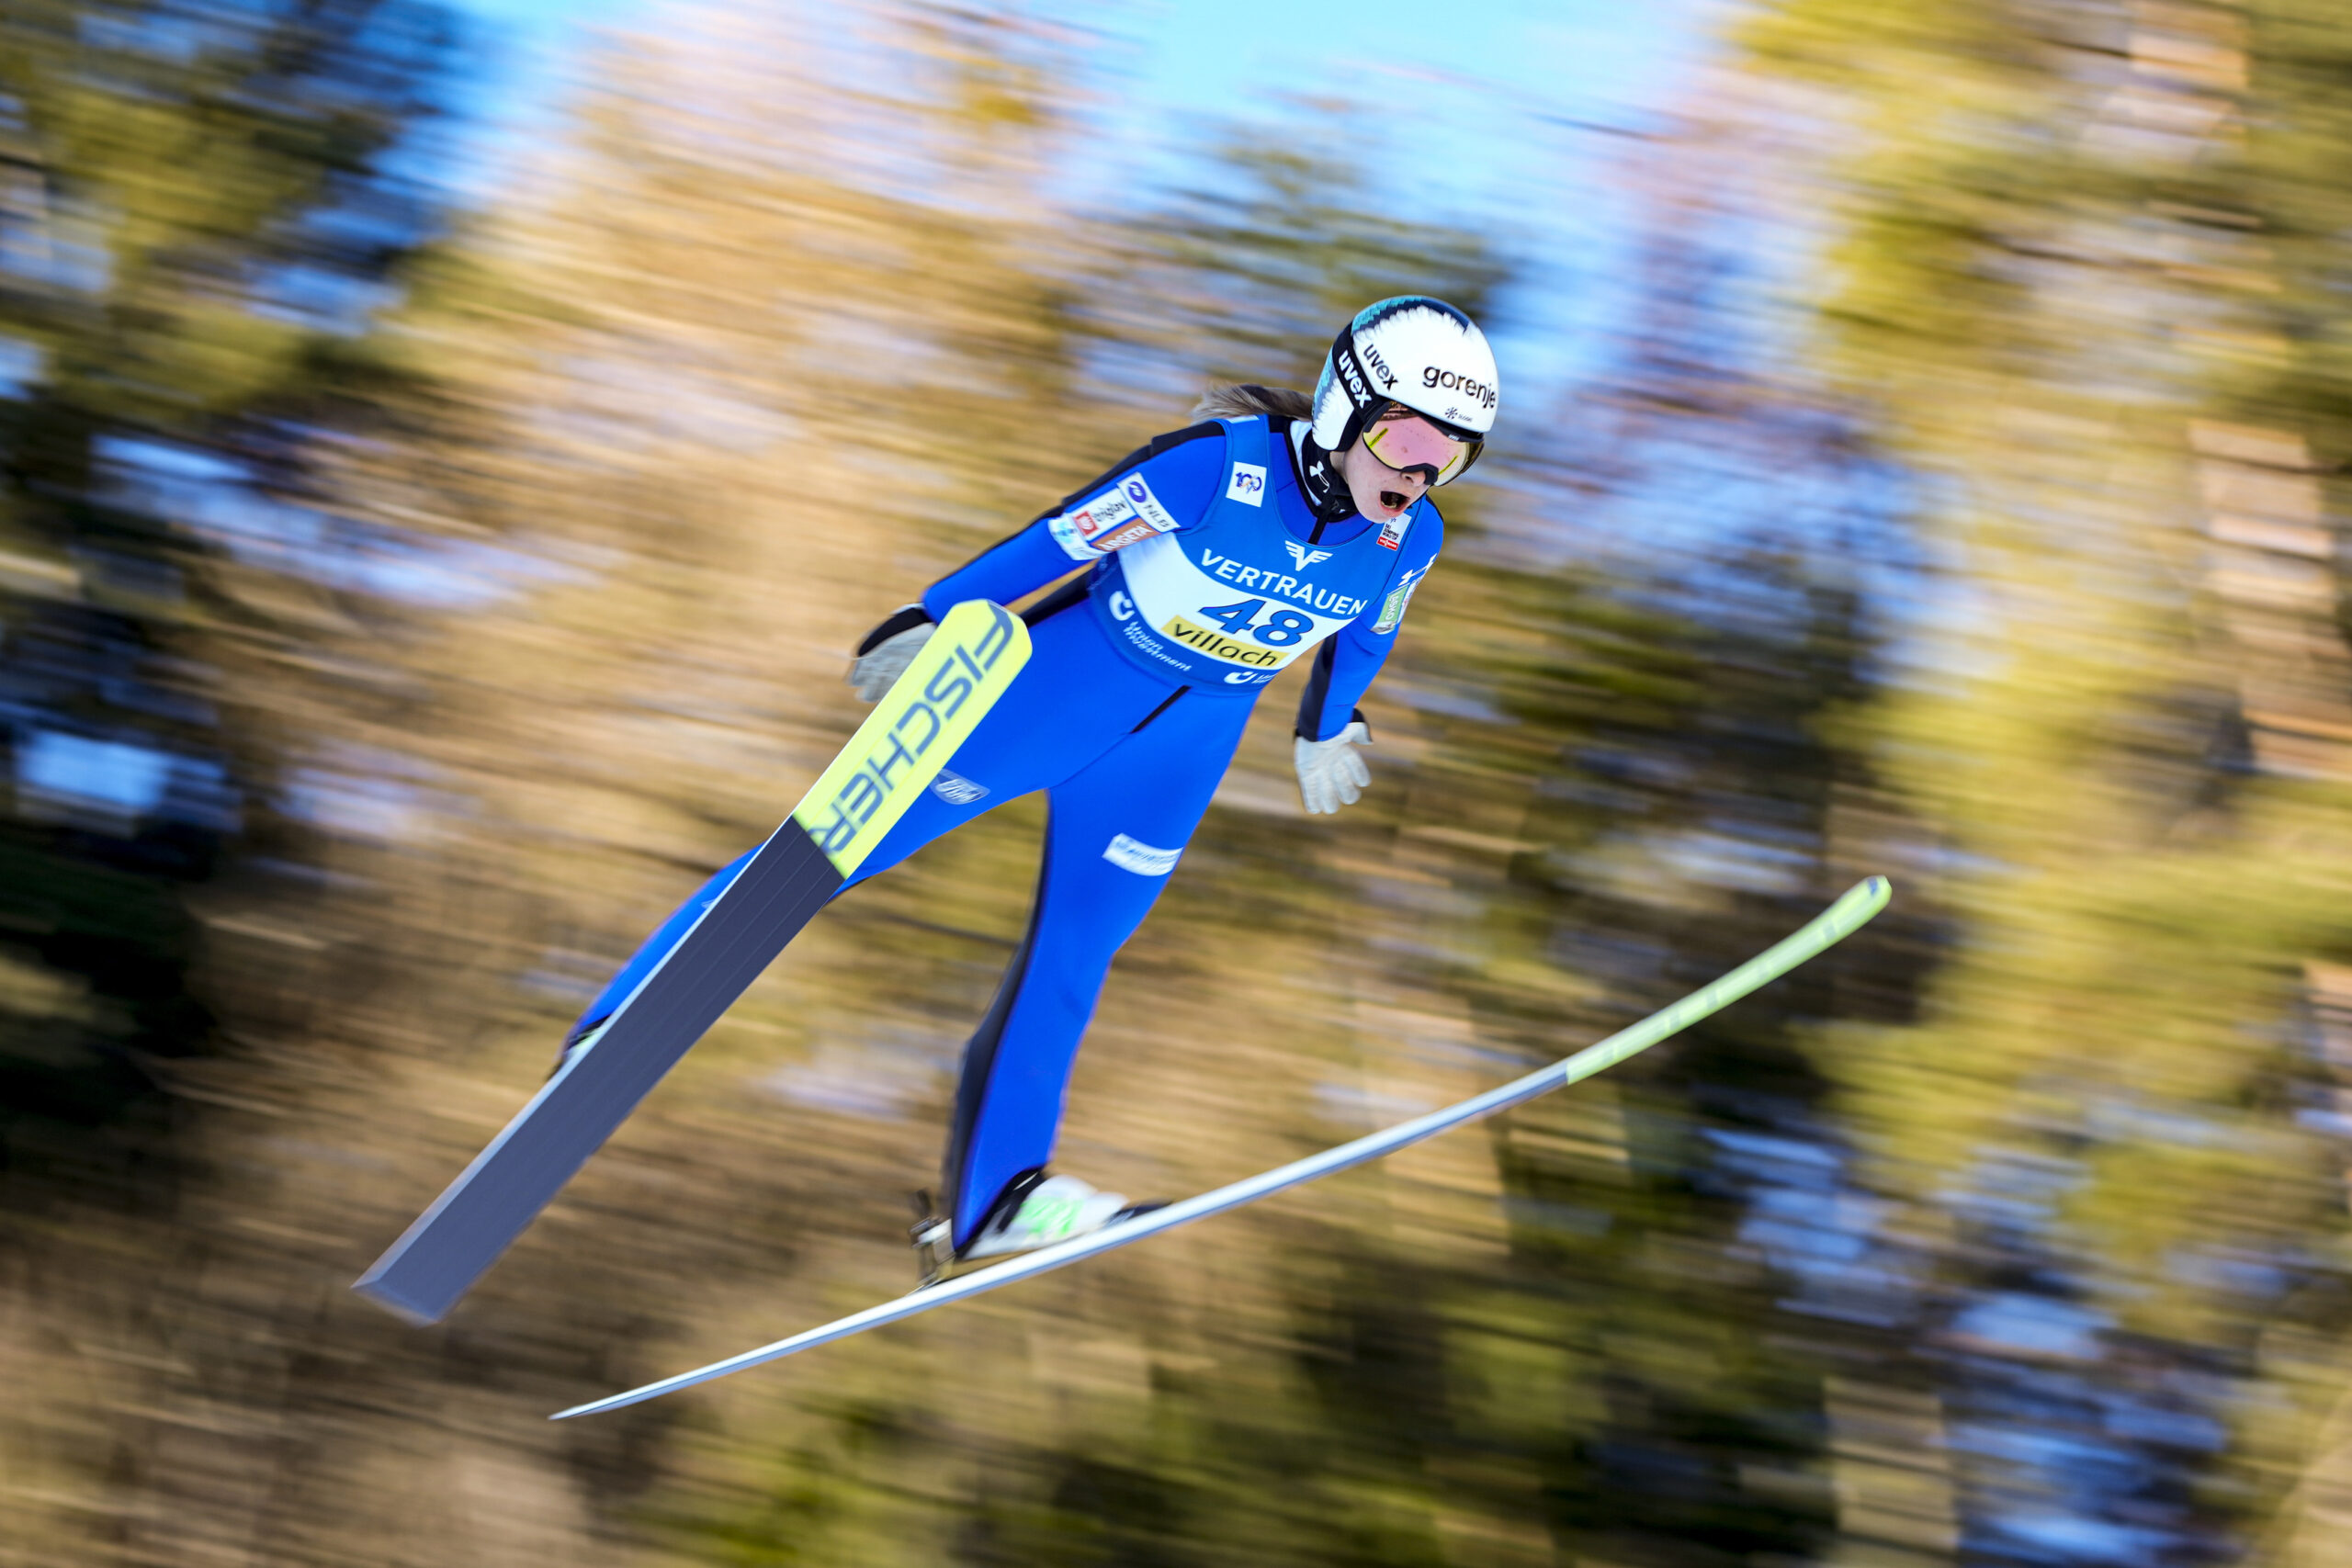 AUSTRIA — Flying with skis for wings: Slovenia's Nika Kriznar competes at the Women Normal Hill Individual Ski Jumping World Cup event in Villach, Austria, Thursday, Jan. 4, 2024.Photo: Darko Bandic/AP